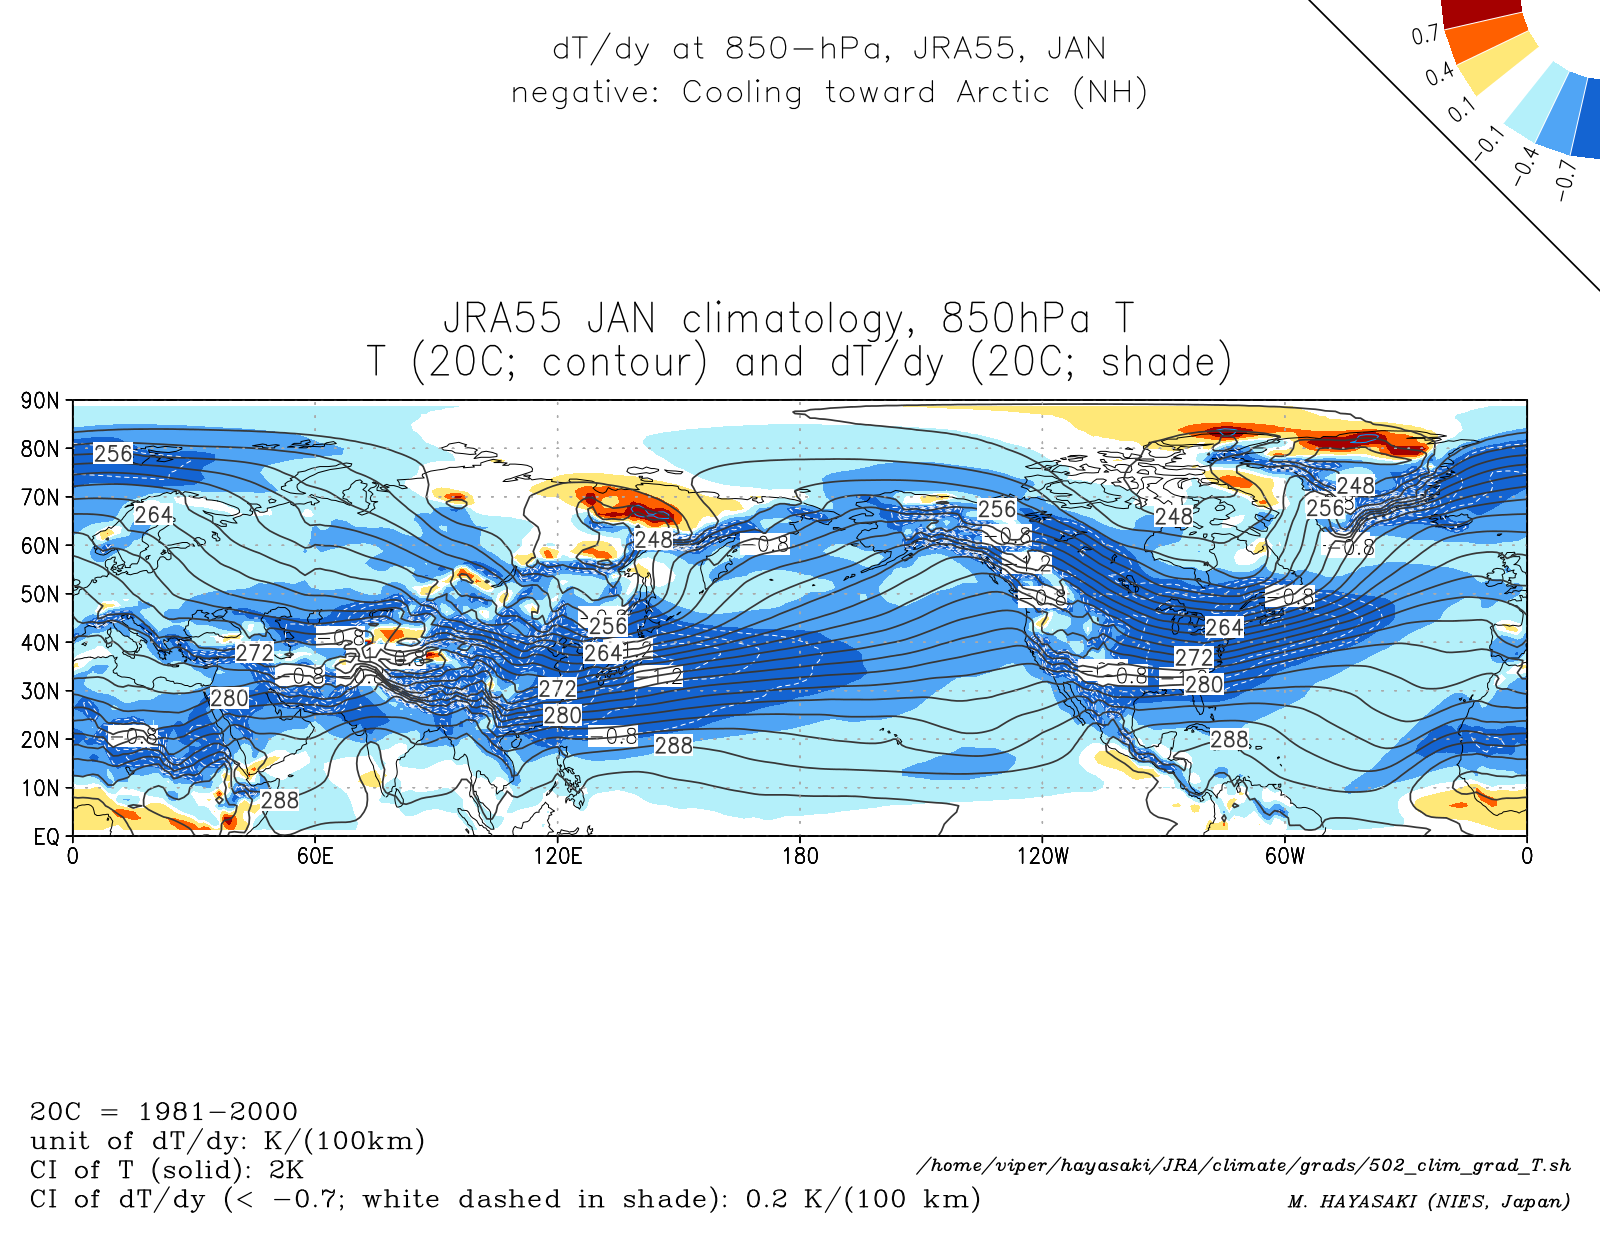 Monthly climatology (Jan) of dT/dy at 850-hPa in the NH